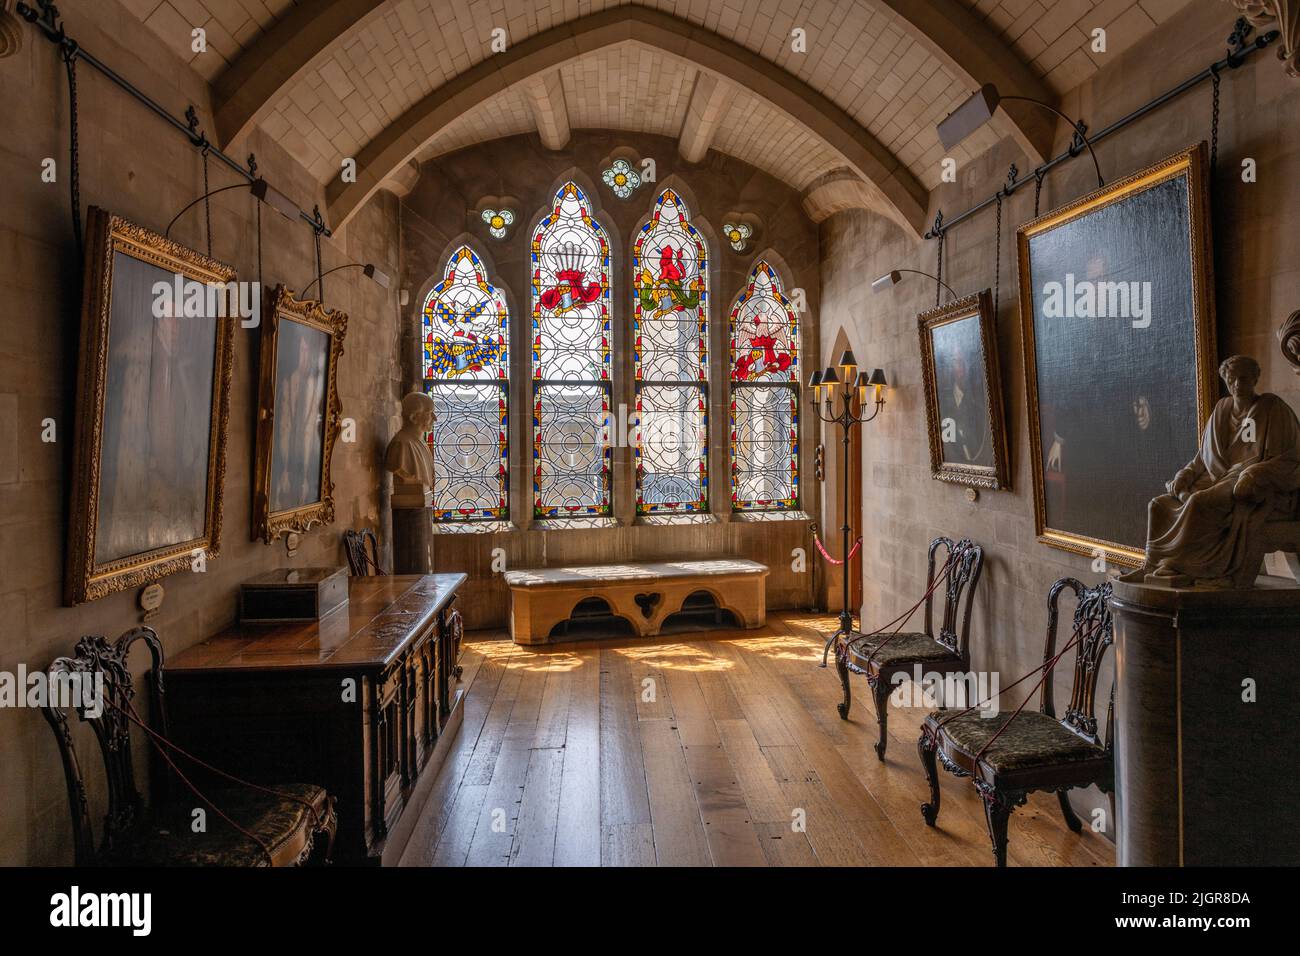 Arundel Castle Interior, Paintings and Window Stock Photo